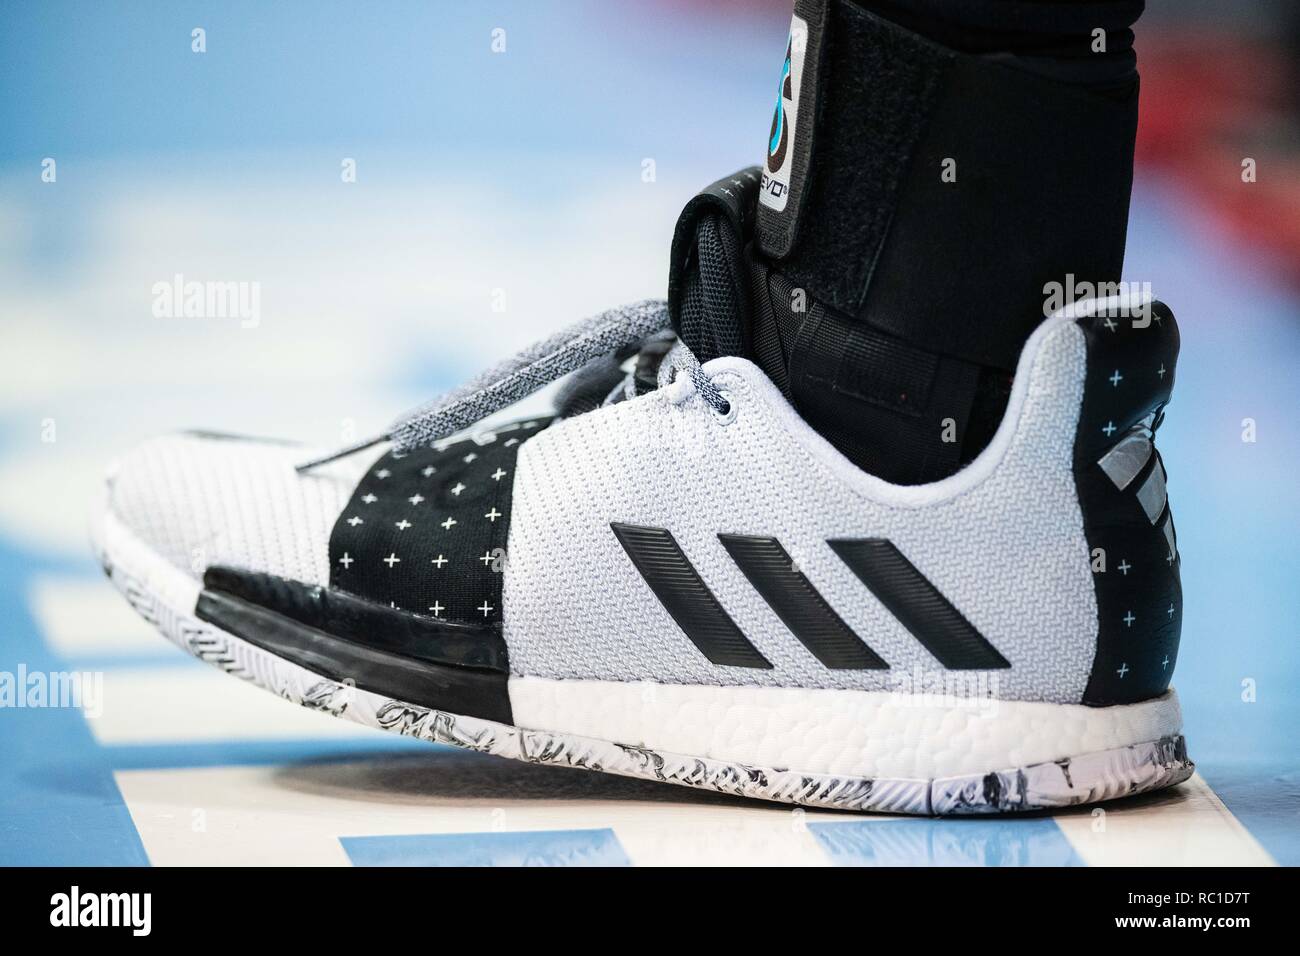 Adidas Heels High Resolution Stock Photography and Images - Alamy